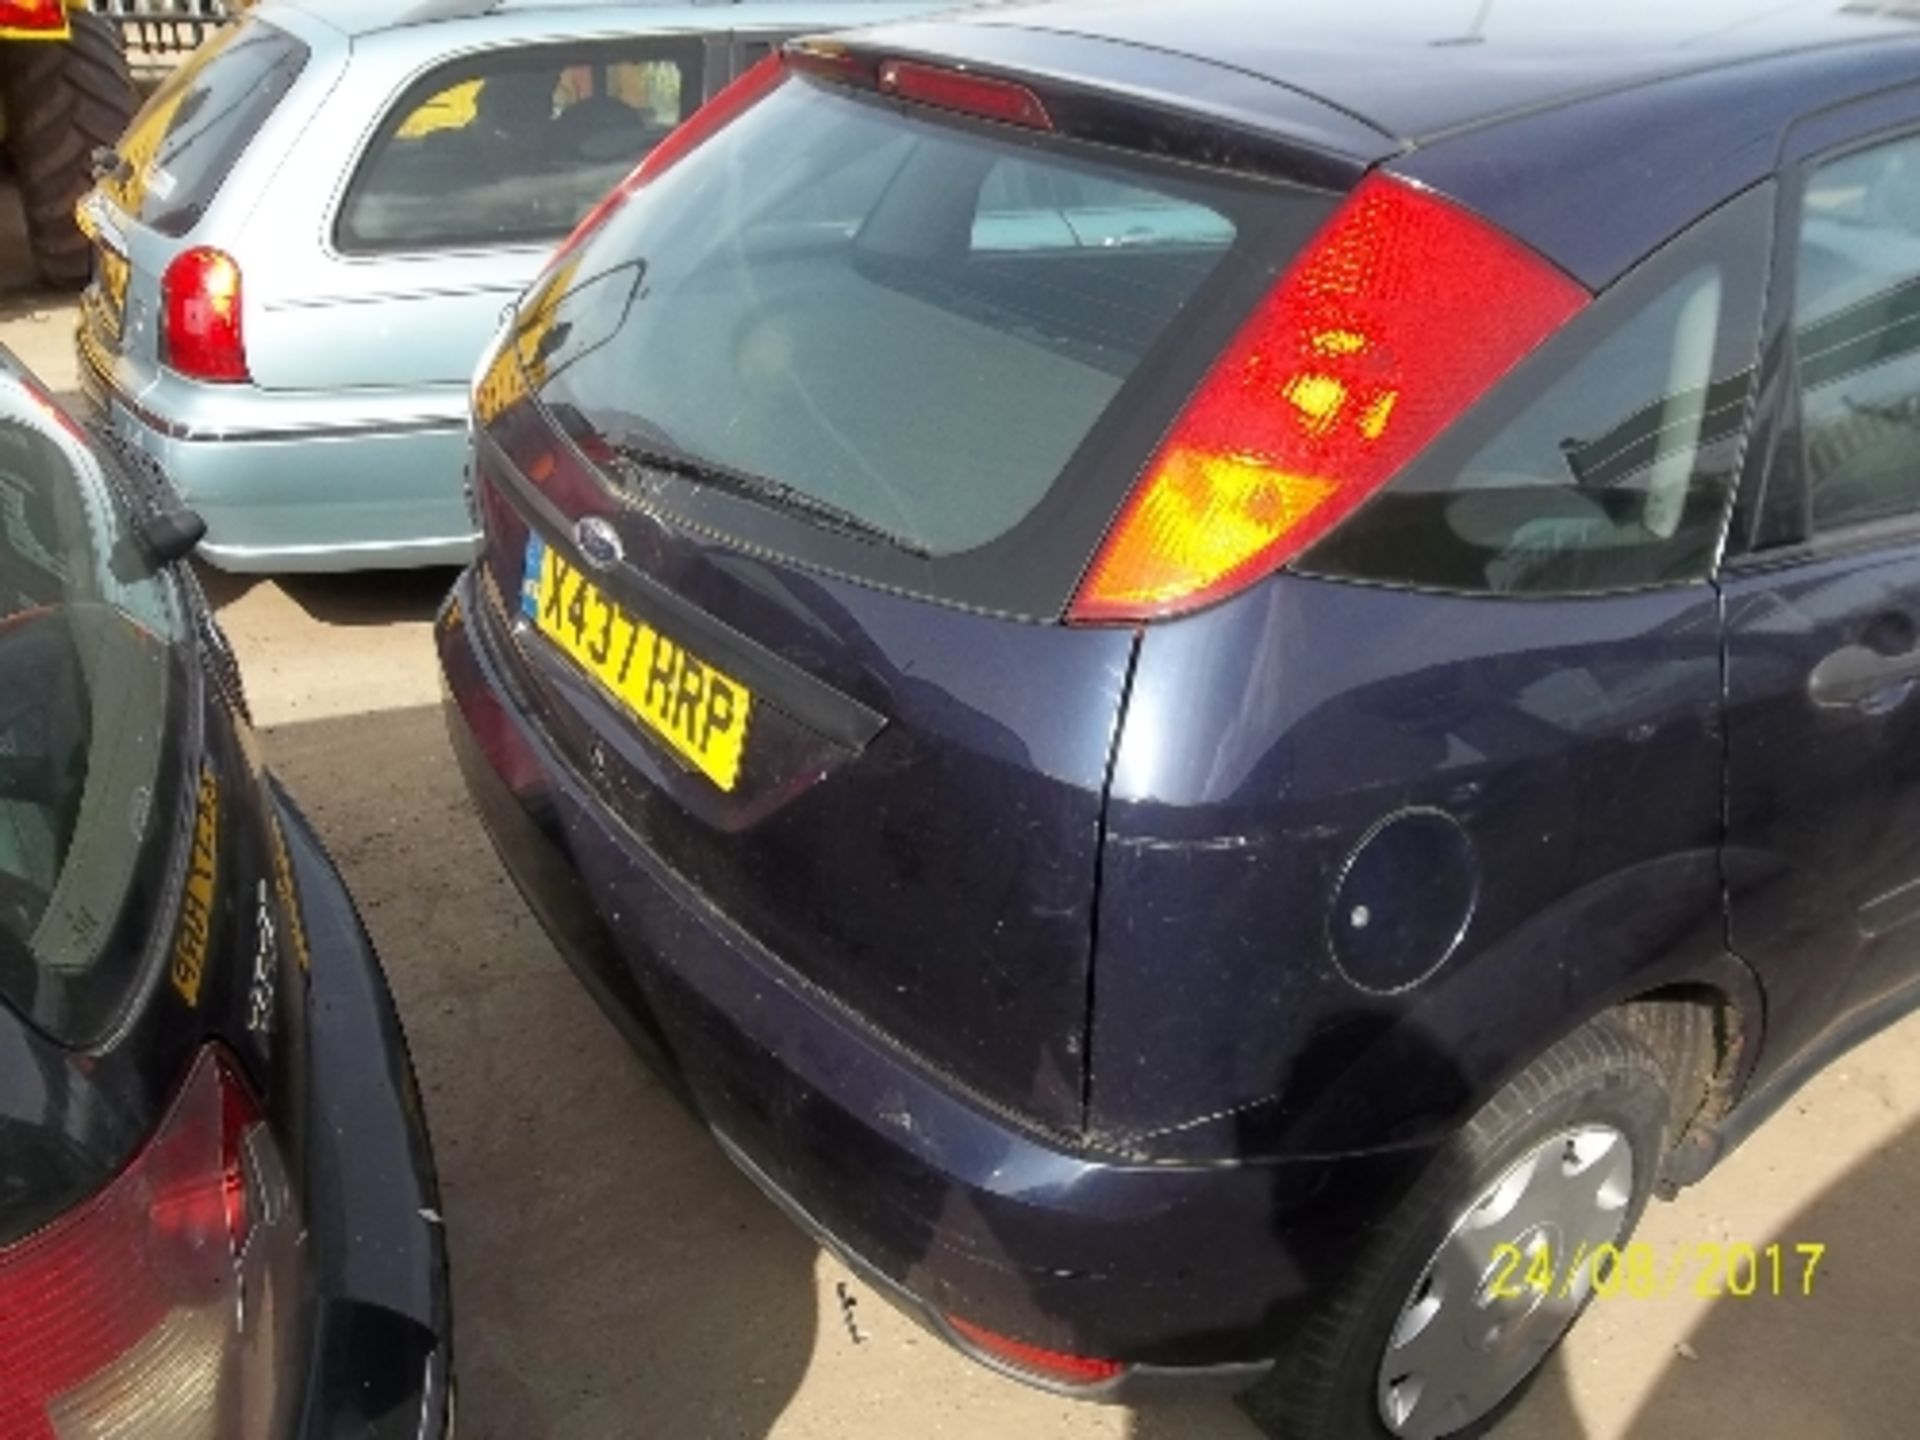 Ford Focus CL - X437 HRP Date of registration: 04.01.2001 1388cc, petrol, manual, blue Odometer - Image 3 of 4